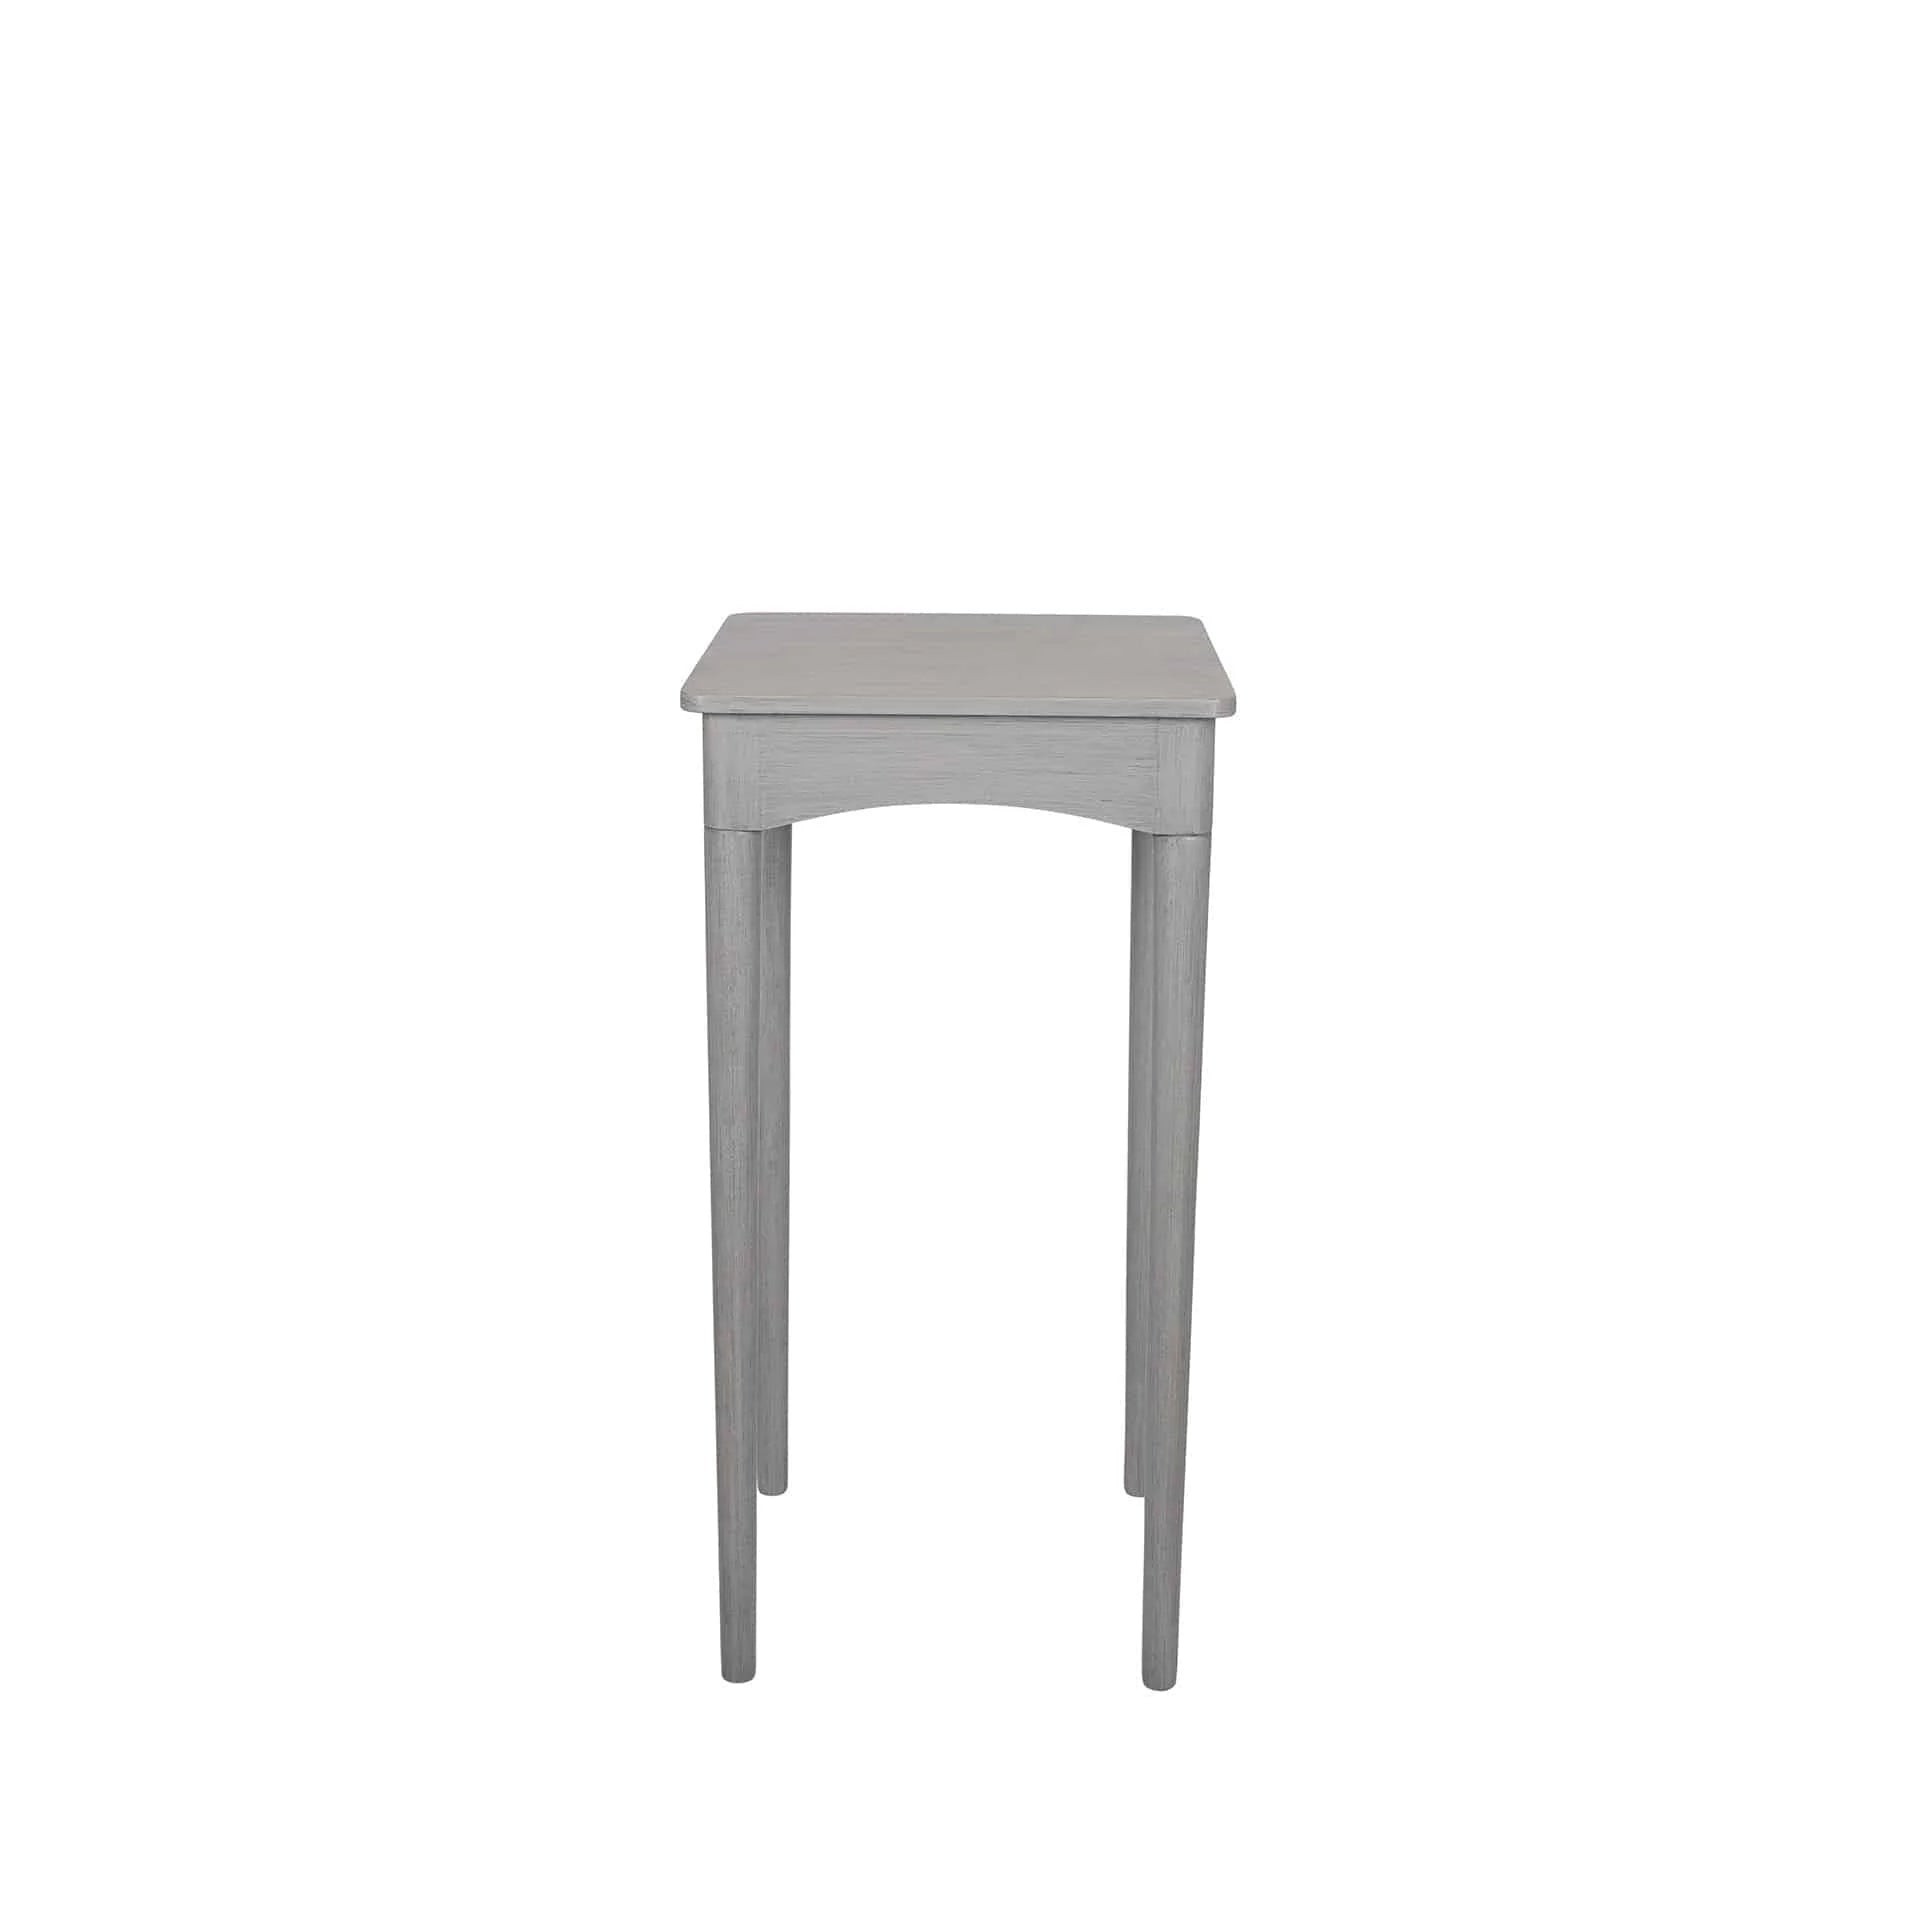 Dark Grey Pine Wood Square Occasional Table for sale - Woodcock and Cavendish